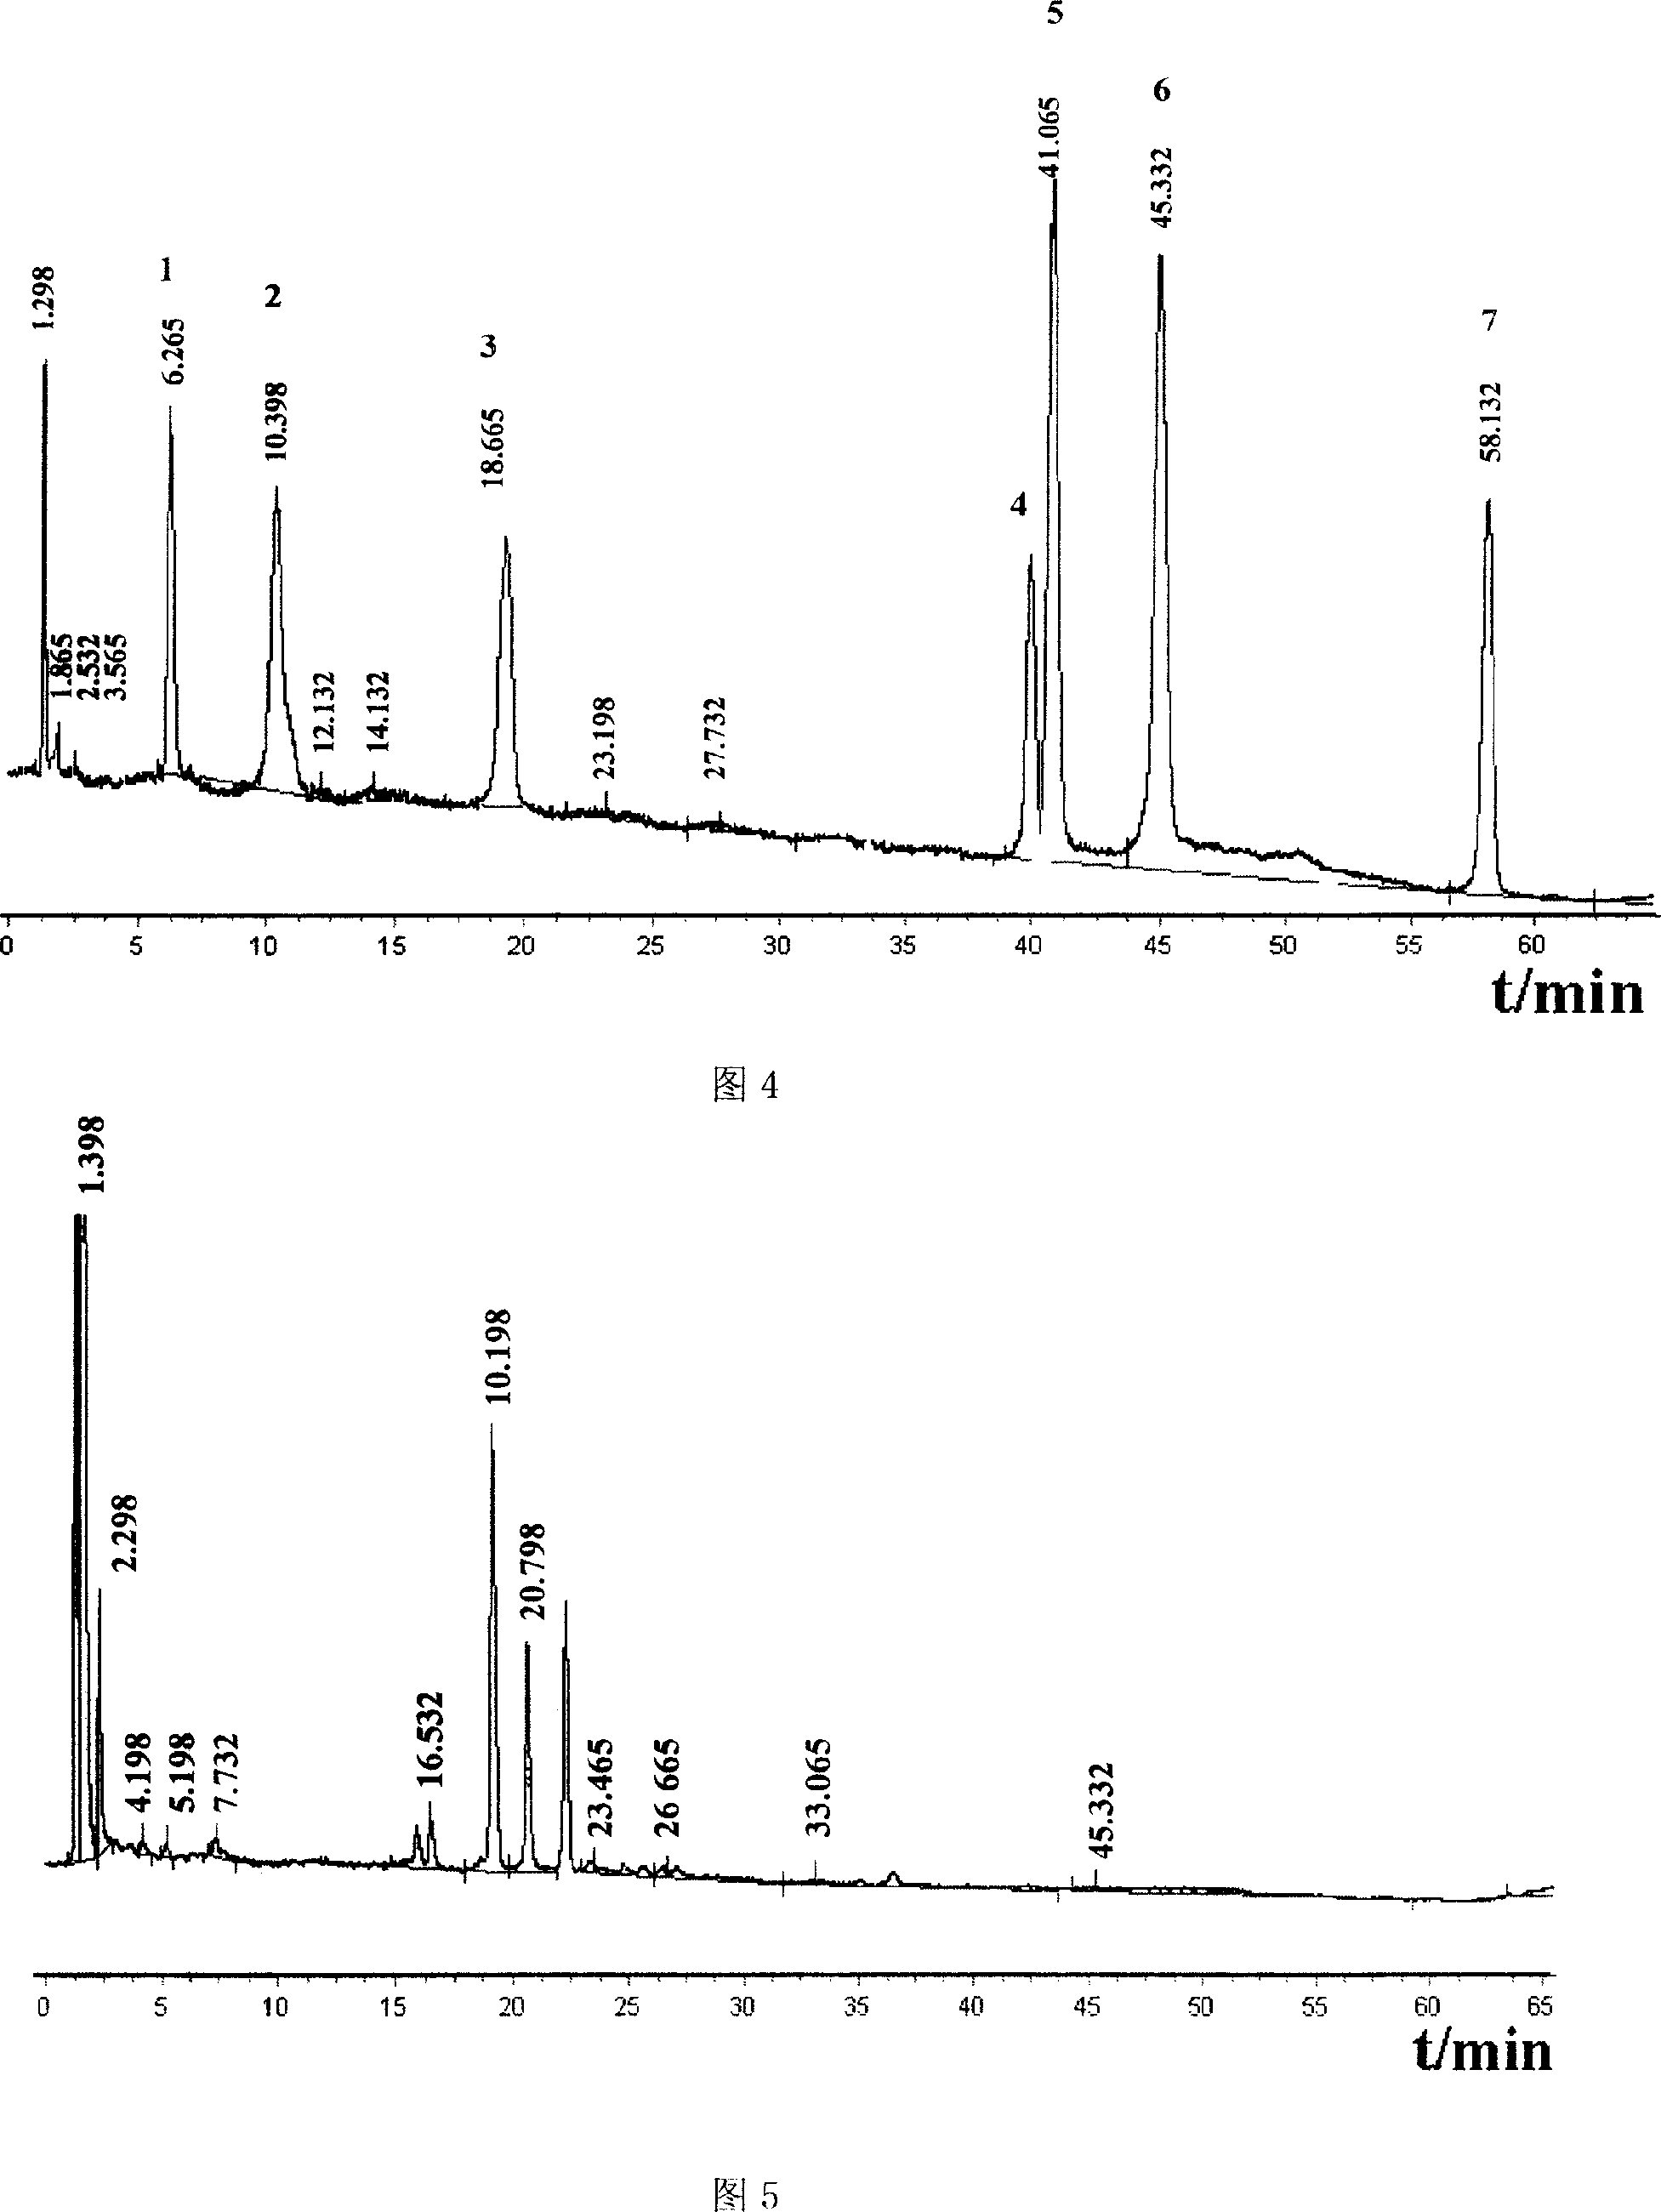 Sichuan fritillary bulb, and method for culture of the same